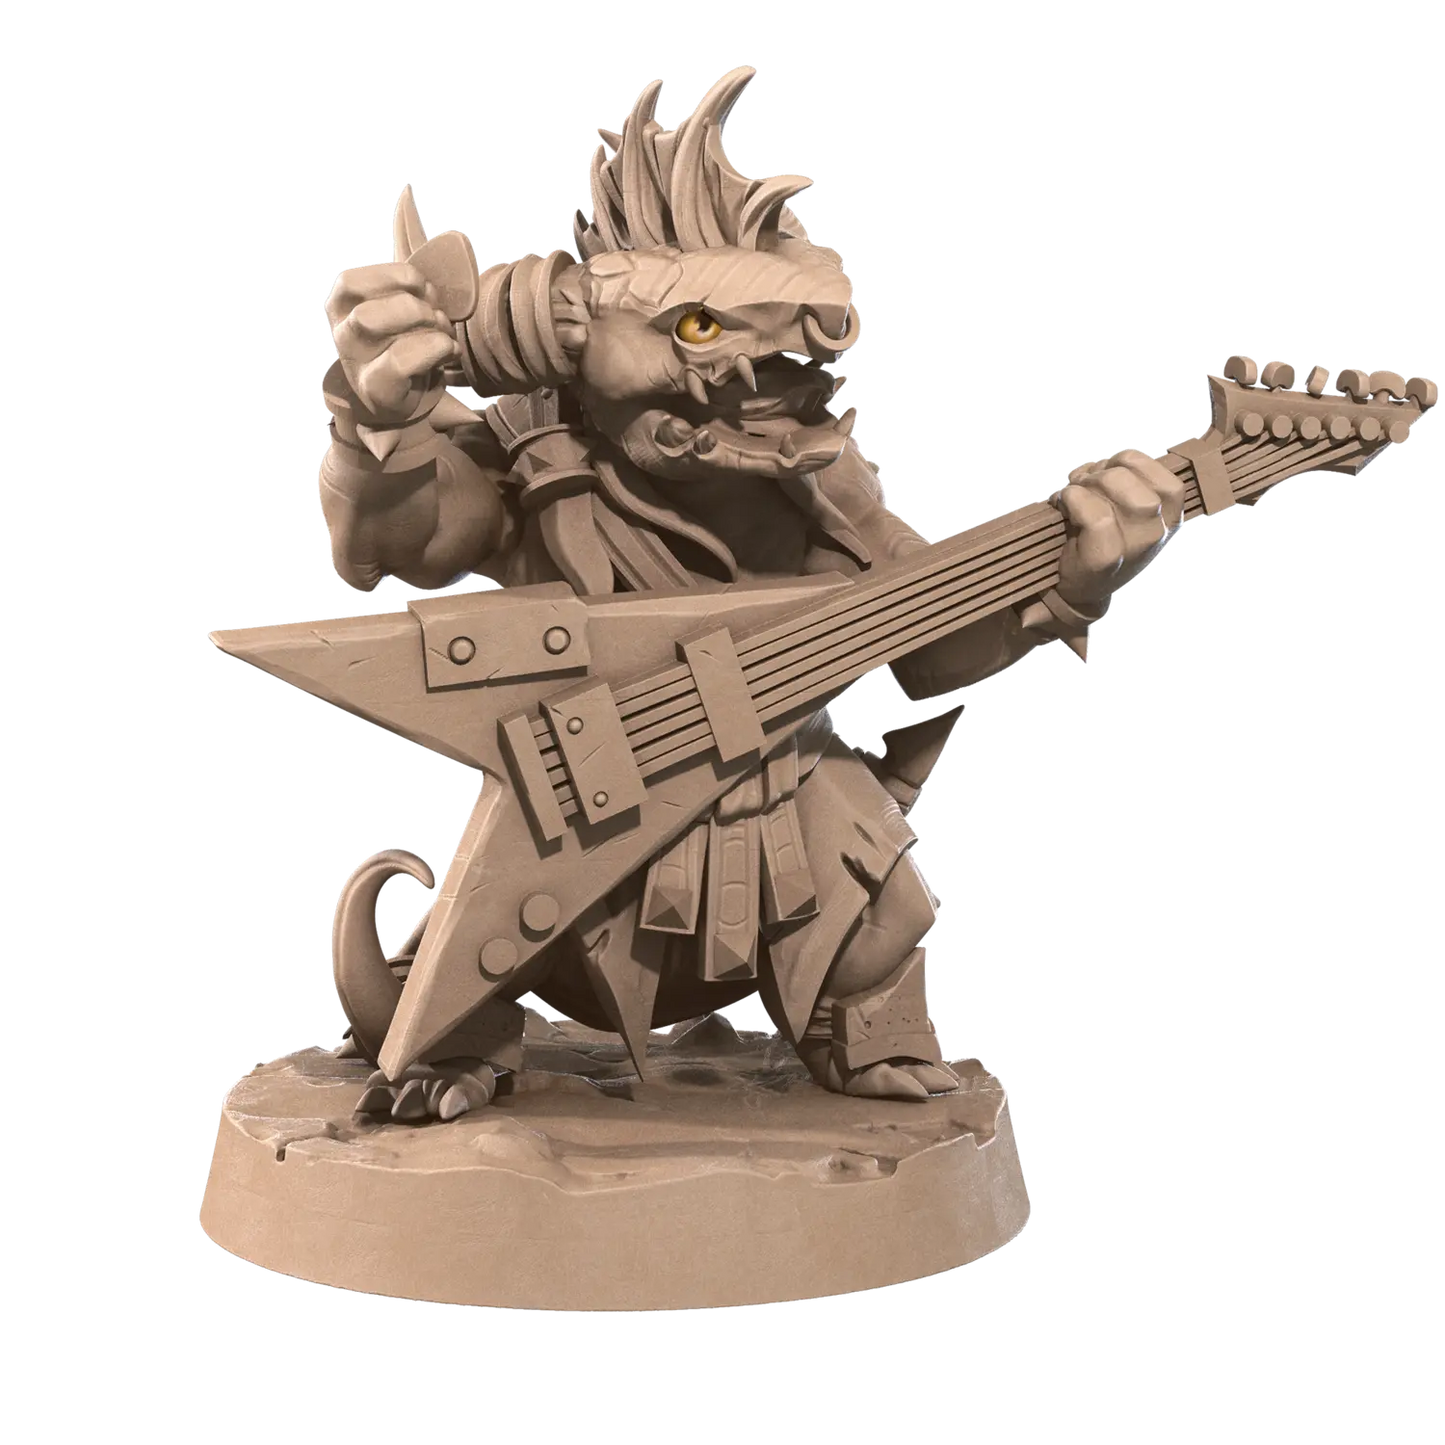 DnD Artificer - Bard - Kobold - Miniature - Monsters Zephyr  Artificer - Bard - Kobold - Miniature - Monsters sold by DoubleHitShop